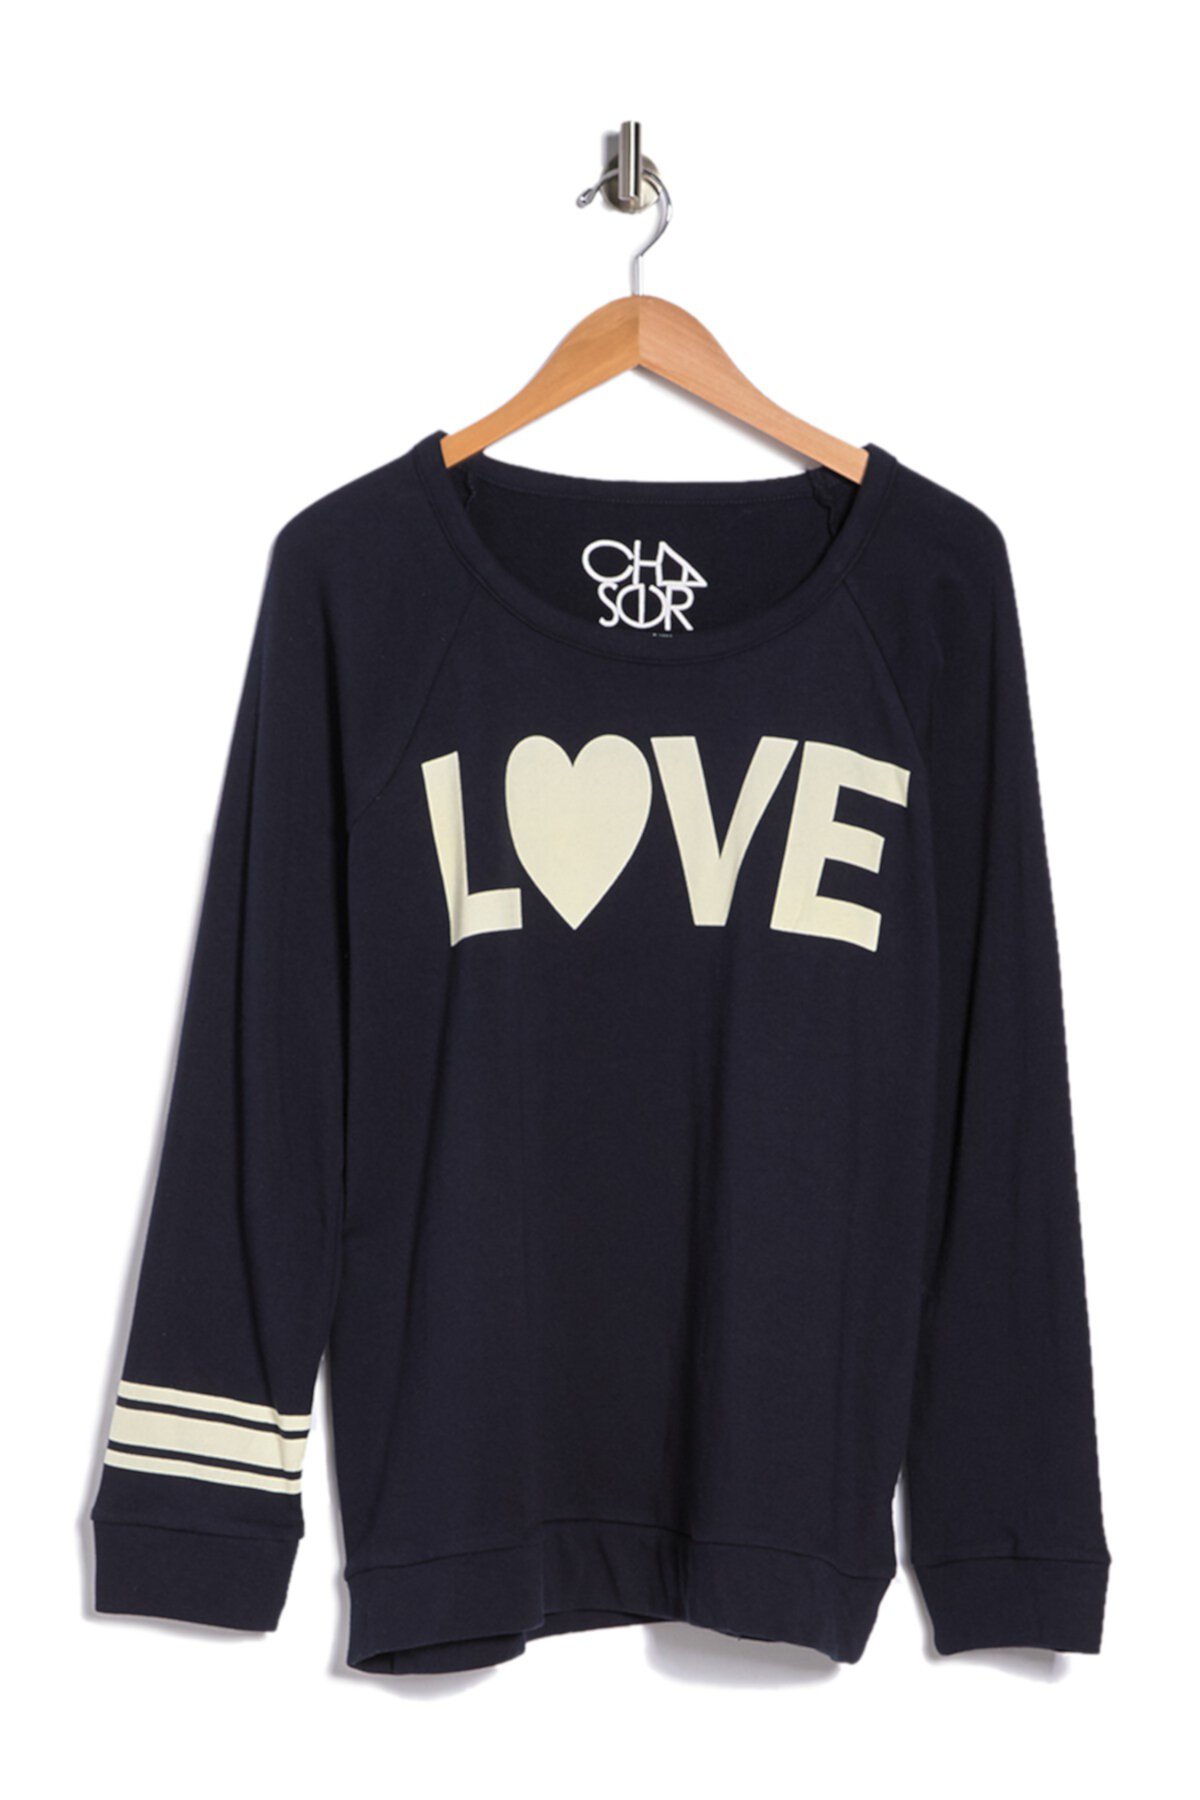 Big Love Pullover Sweater (Plus Size) Chaser